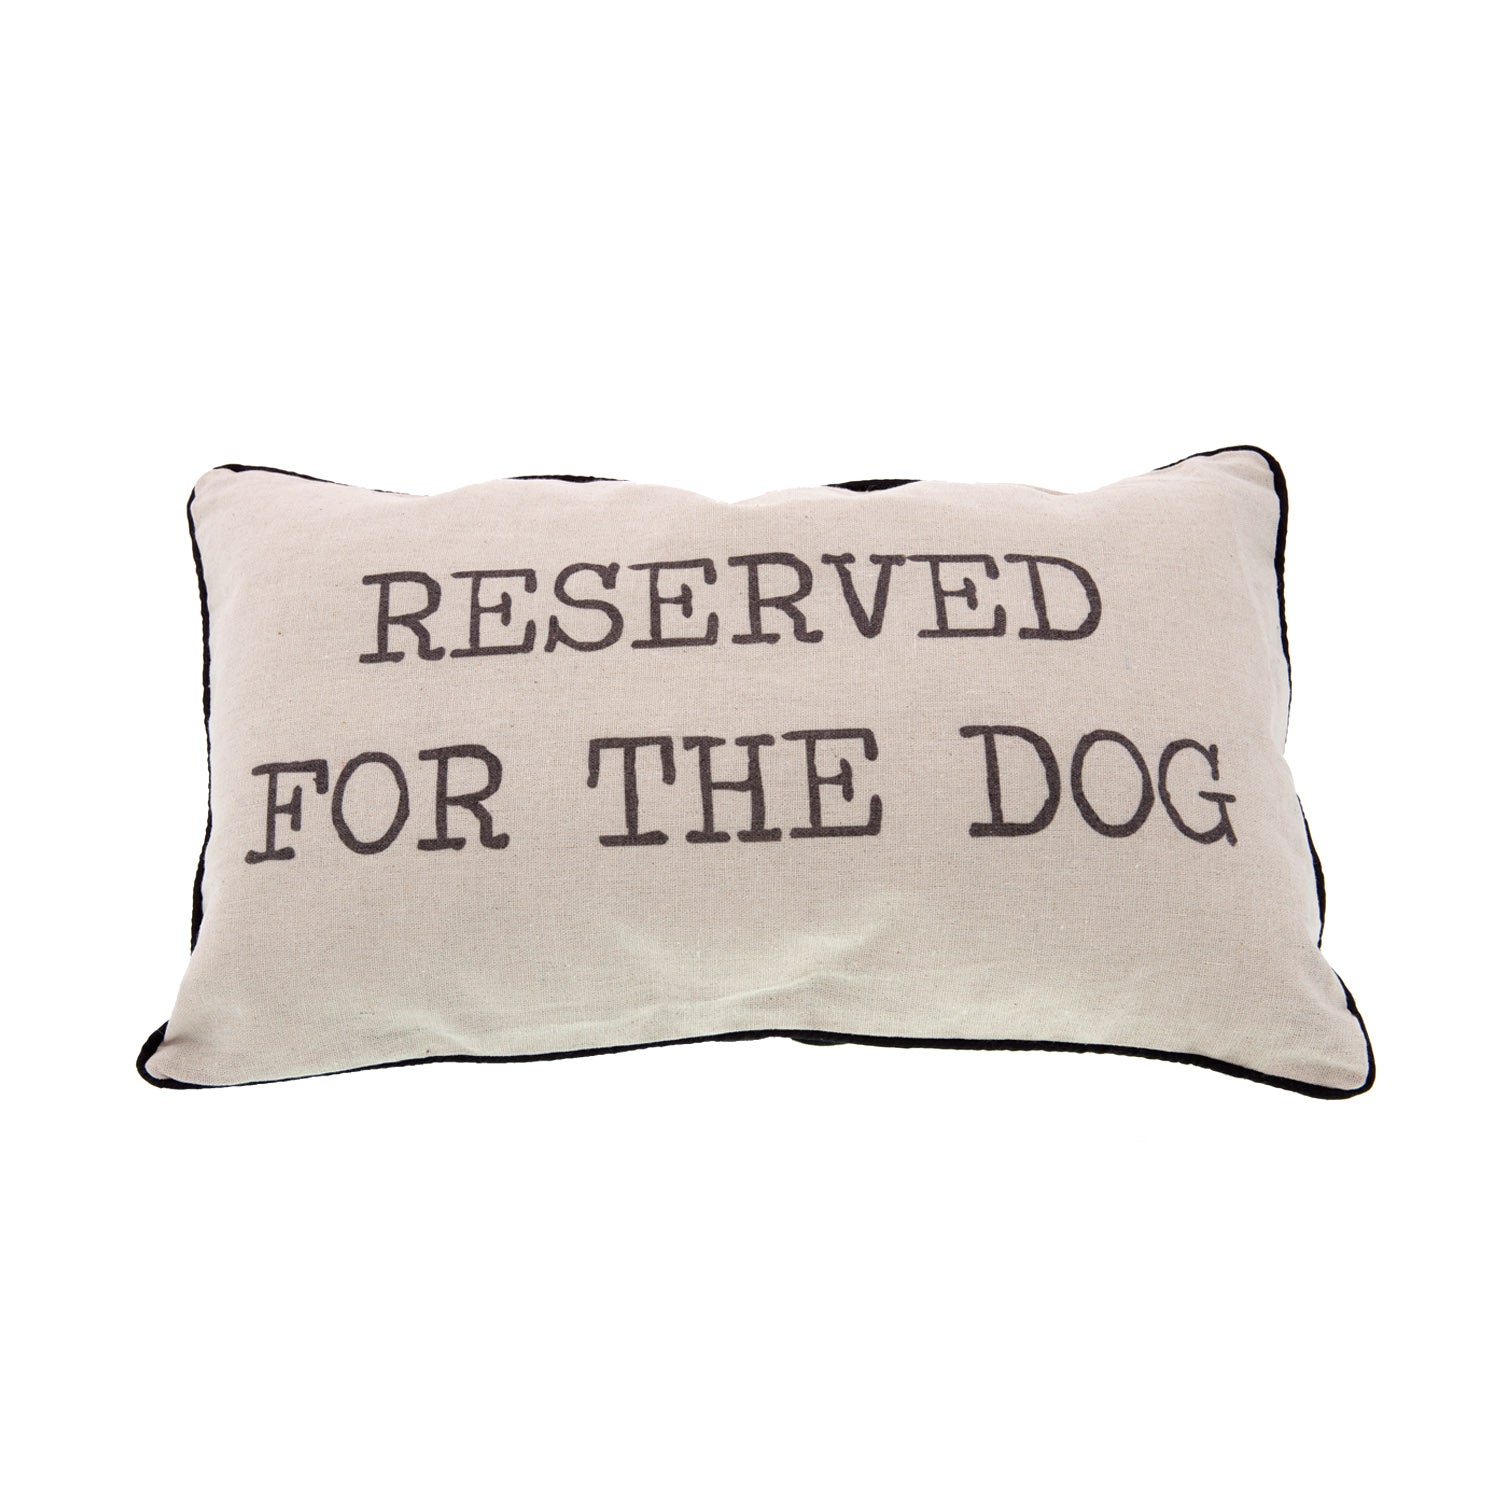 DogKrazyGifts - Reserved For The Dog Cushion- part of the Home Furnishing range available from Dog Krazy Gifts